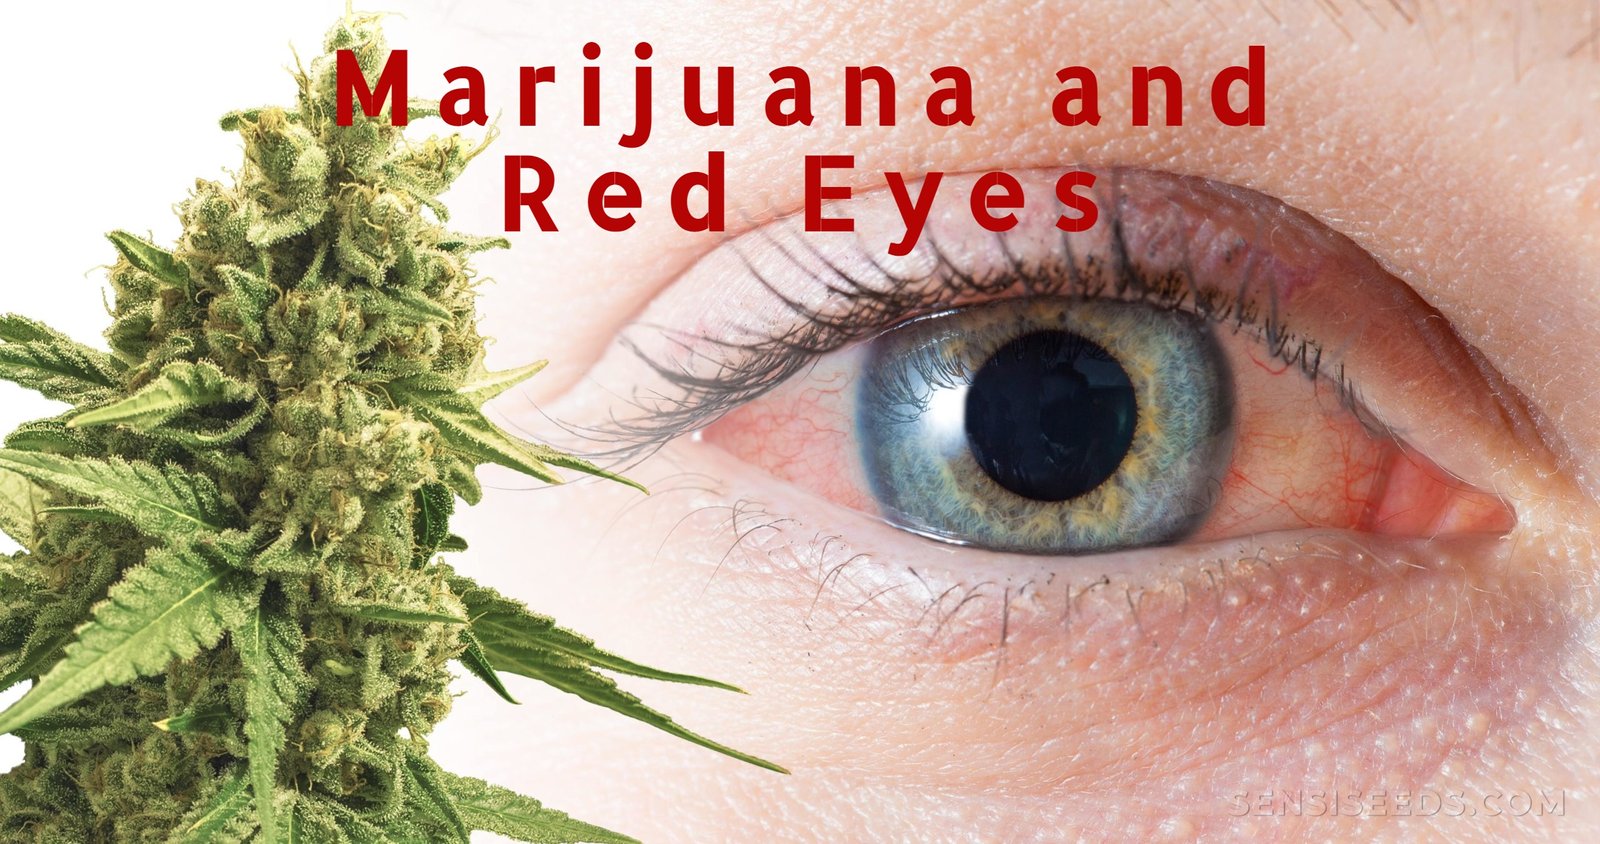 Why does marijuana make your eyes red?